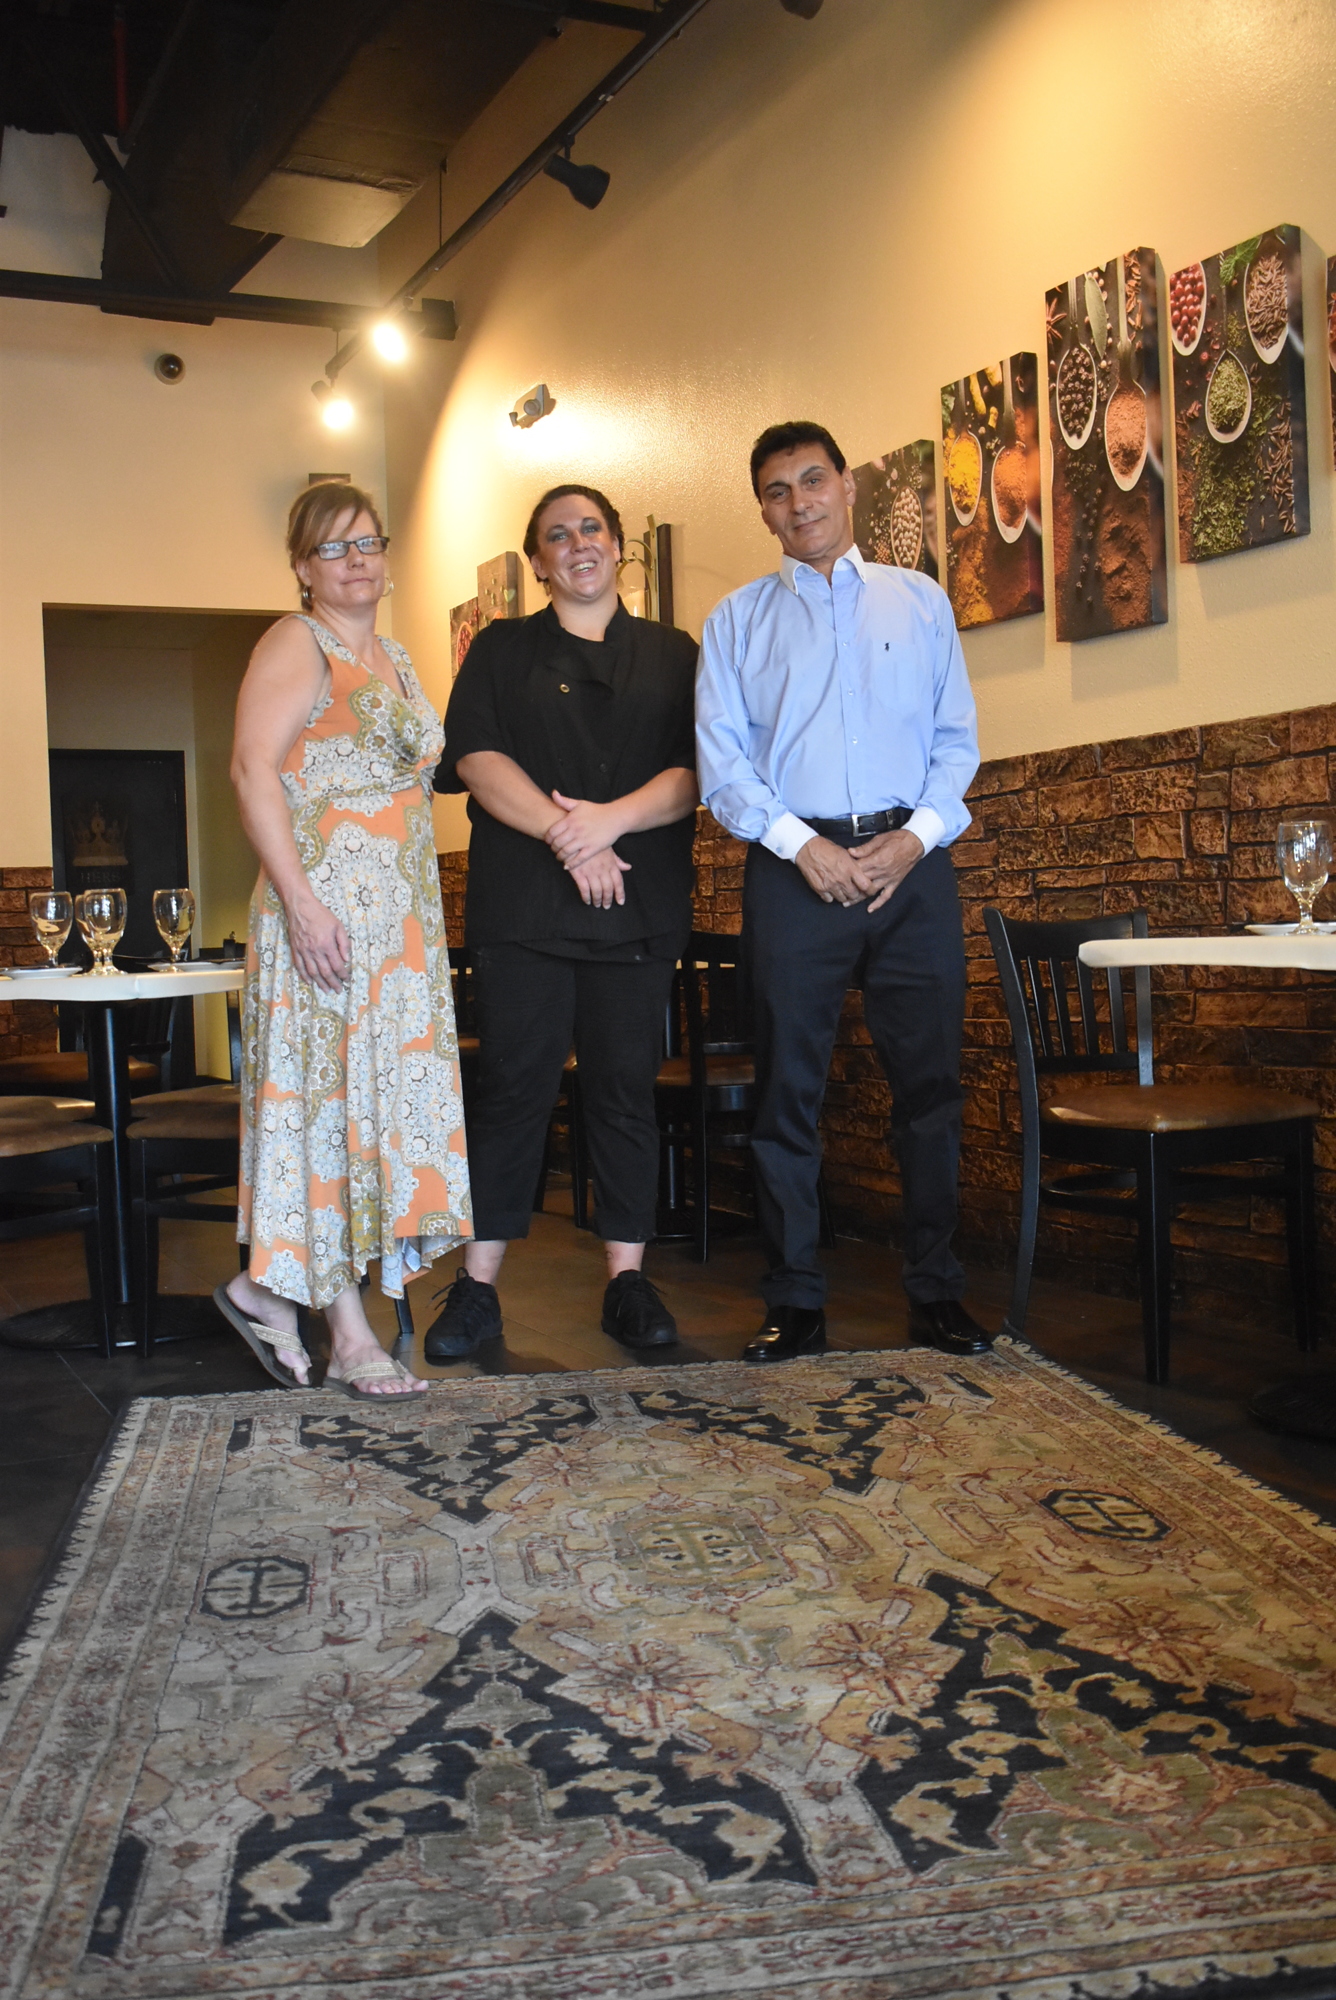 (From left) Sharie Kelly, Jennifer Ramsey and Nabil Rezkalla. Kelly and Rezkalla co-own Riviera Mediterranean Grille, while Rezkalla and Ramsey are both chefs at the restaurant.